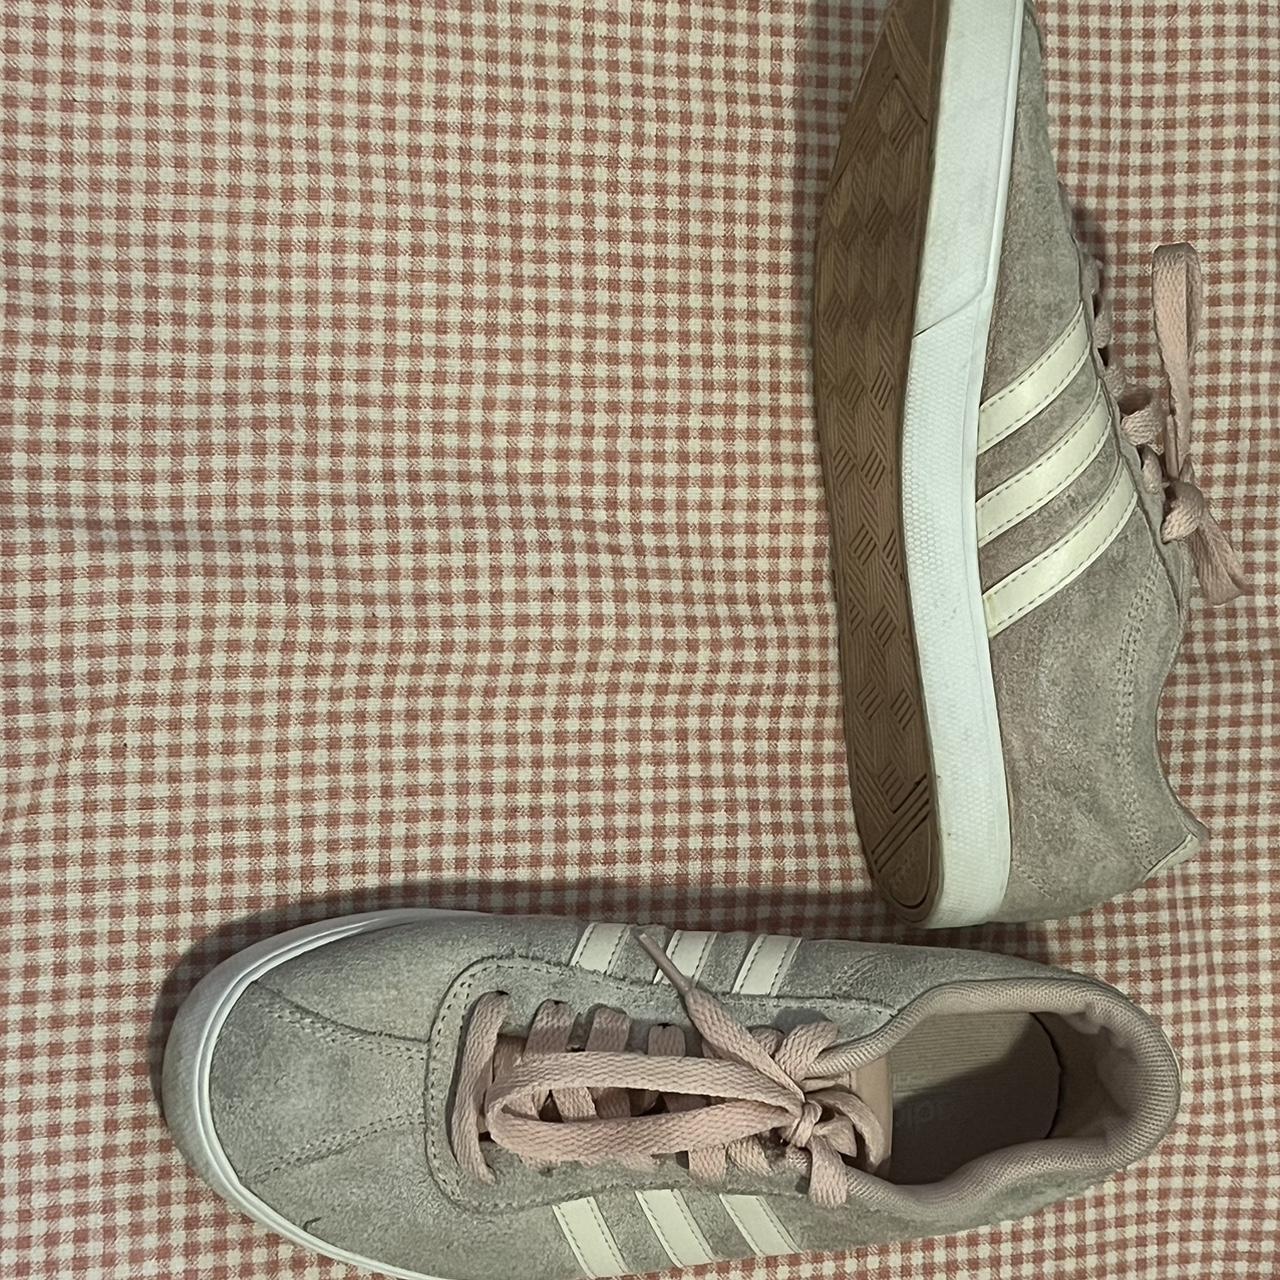 Adidas Women's Pink Trainers